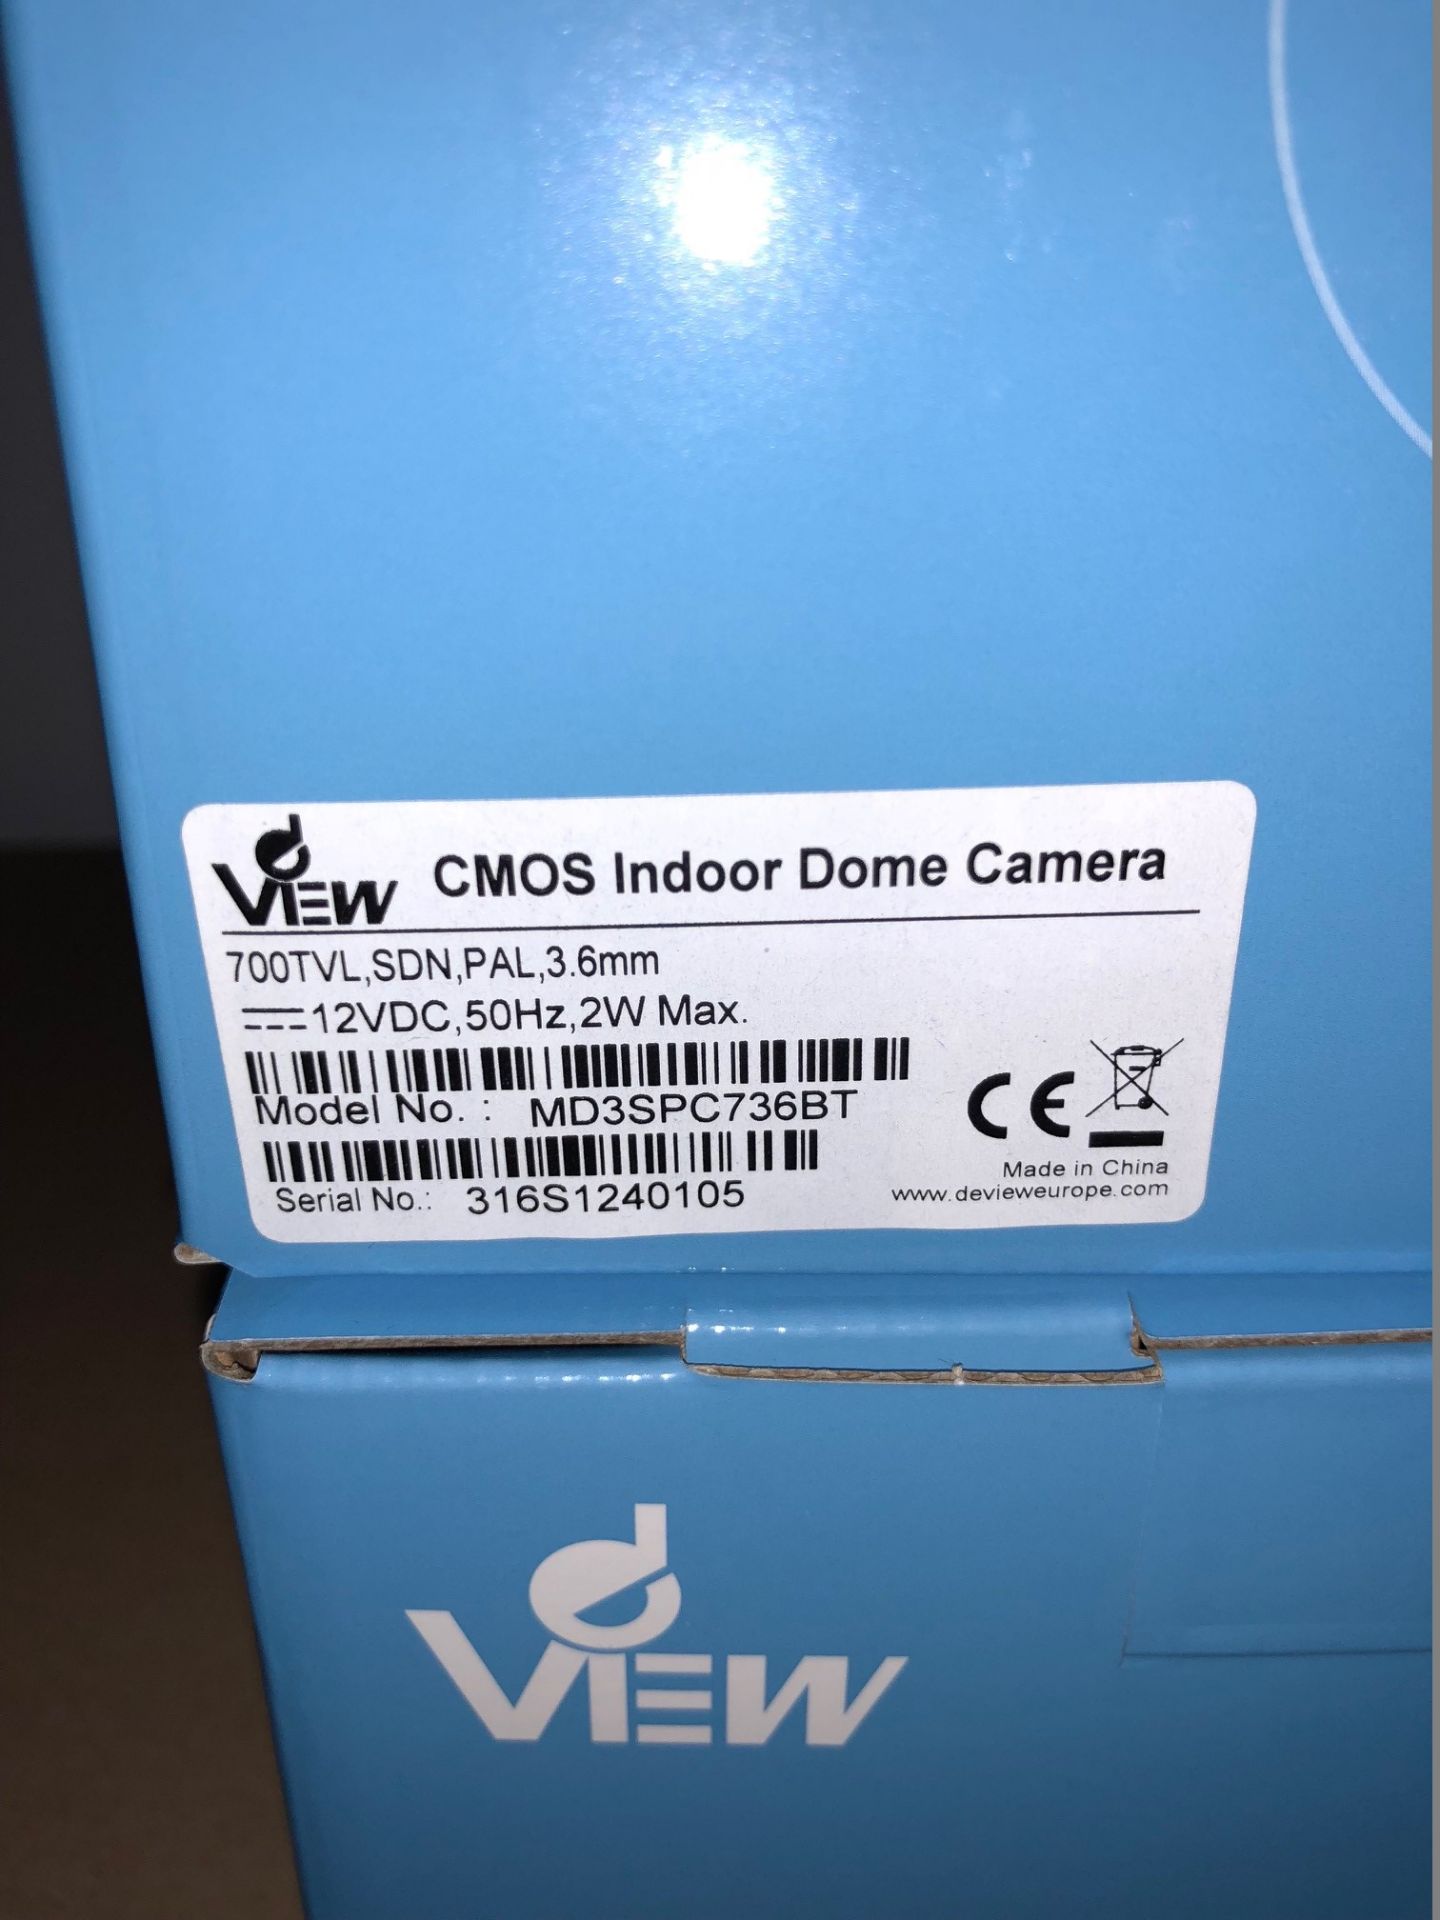 4 x dView CMOS Indoor Dome Cameras - 700TVL, SDN, PAL, 3.6mm - Model MD3SPC736BT (Brand New & - Image 2 of 3